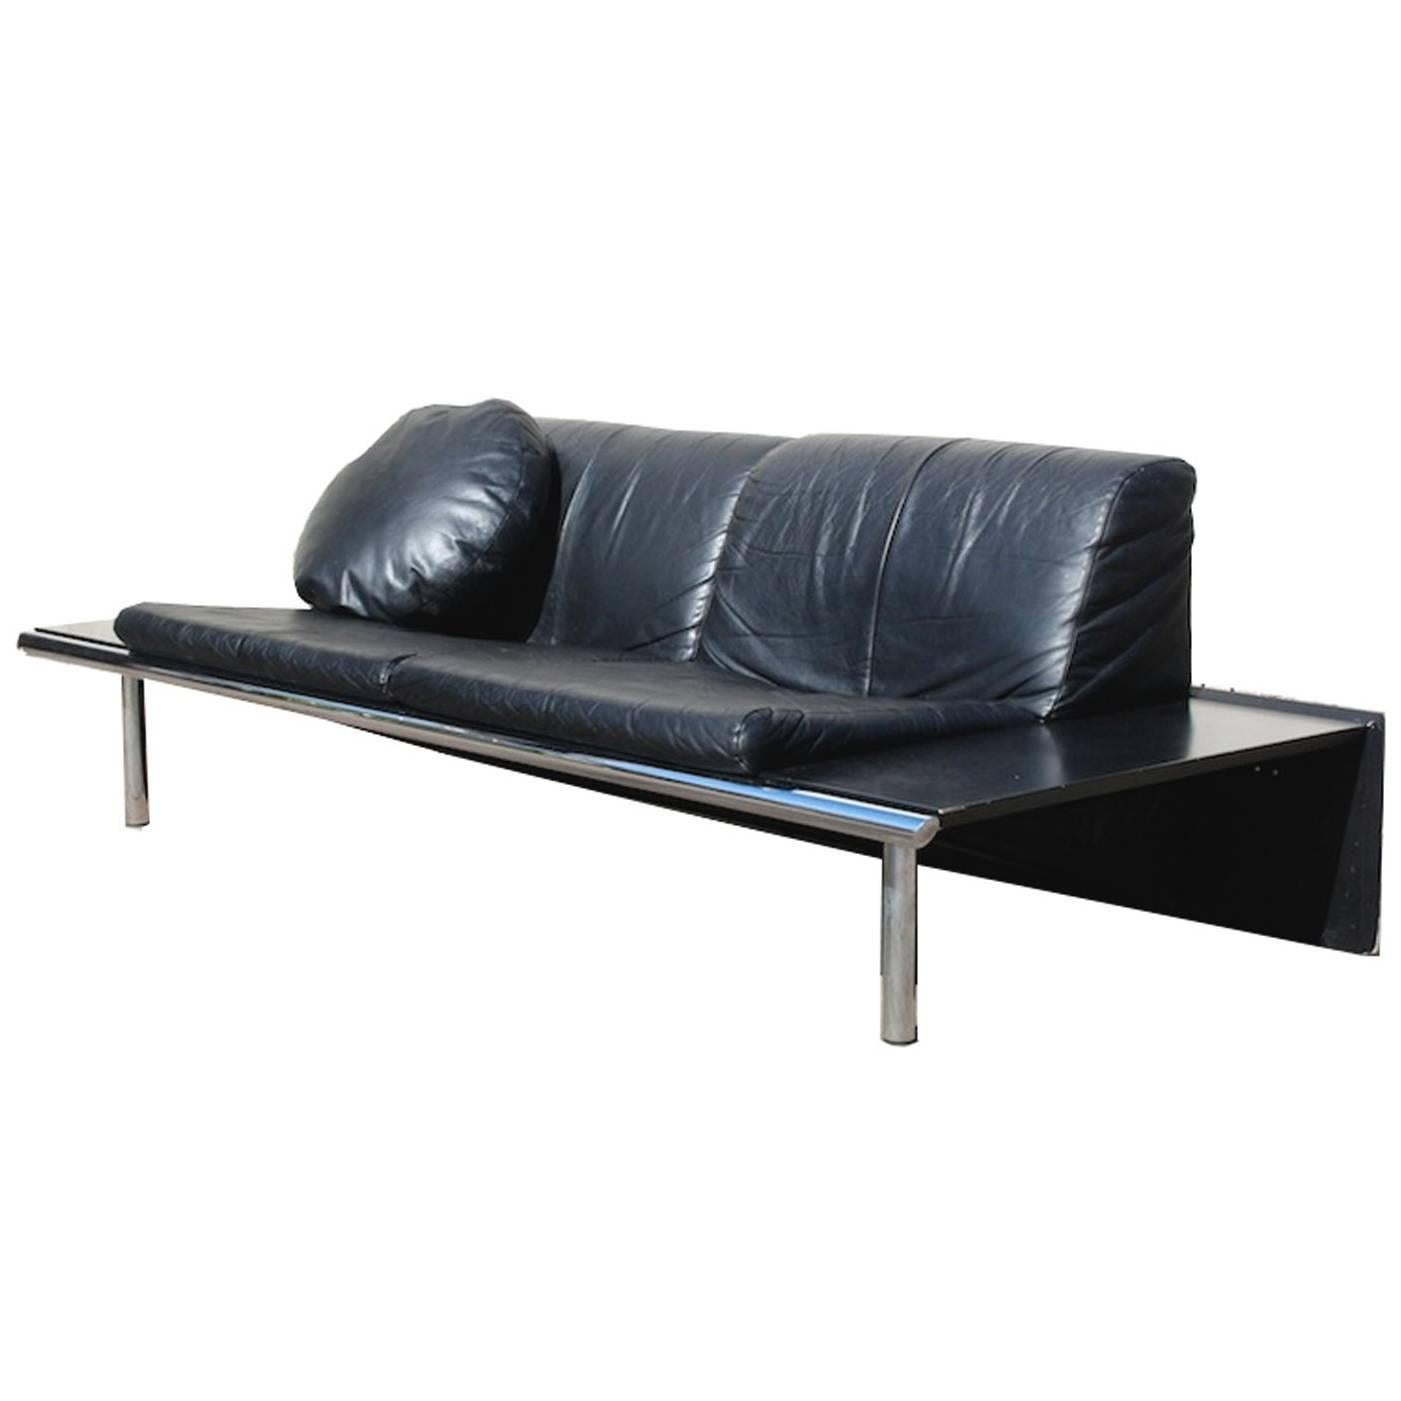 Super Eighties Black Leather Sofa by Harvink, Dutch Design For Sale